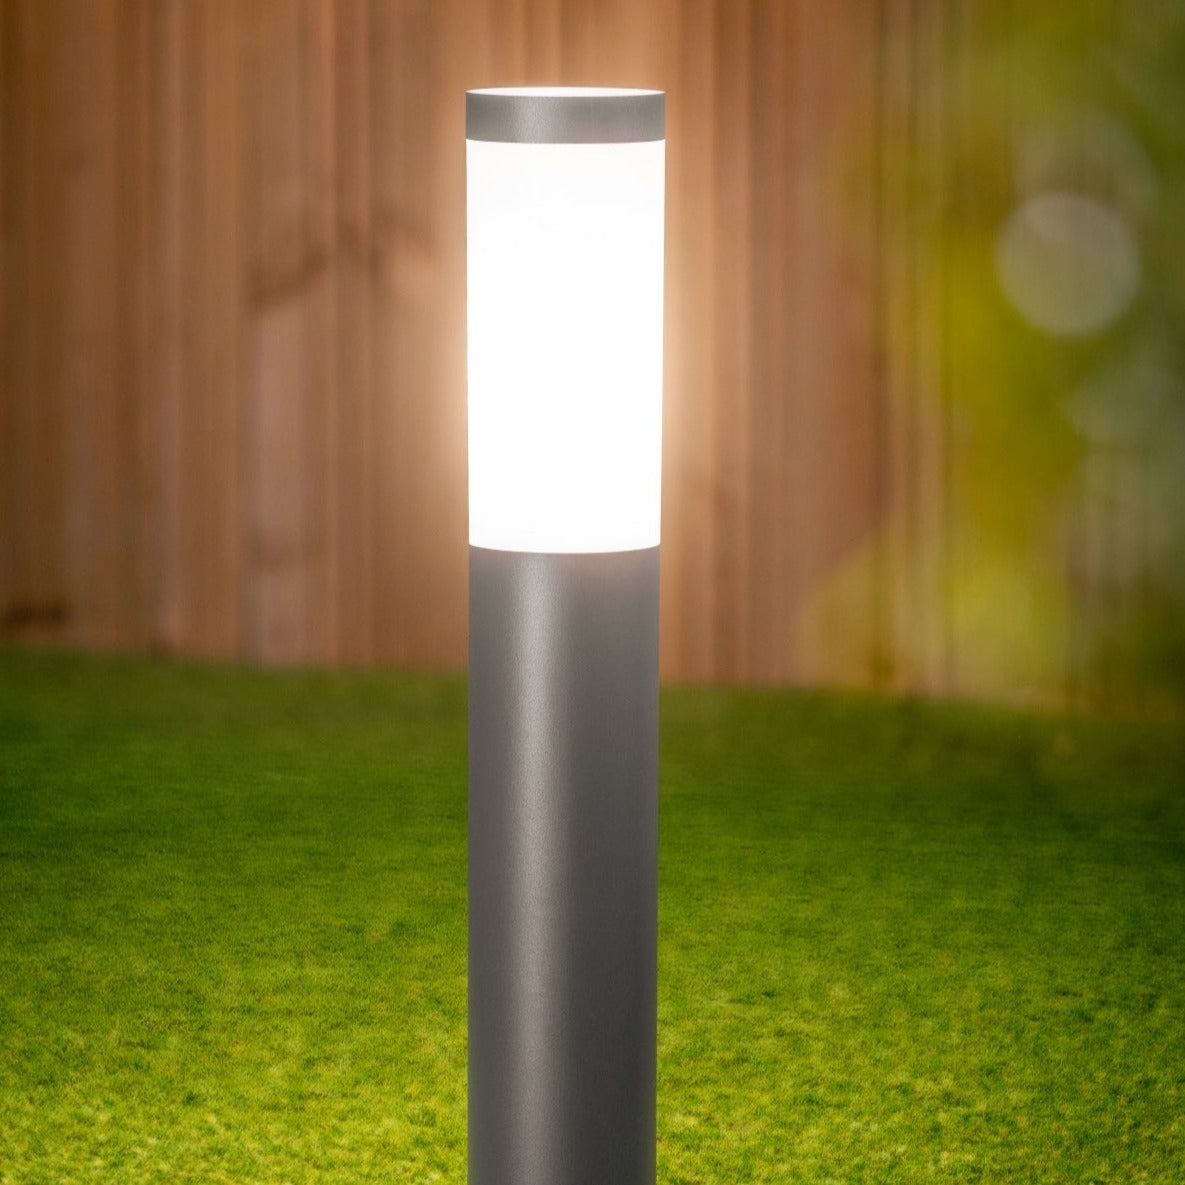 Our Rome dark anthracite grey outdoor post light would look perfect in a modern or more traditional home design. Outside post lights can provide atmospheric light in your garden, at the front door or on the terrace as well as a great security solution. It is designed for durability and longevity with its robust material producing a fully weatherproof and water resistant light fitting.